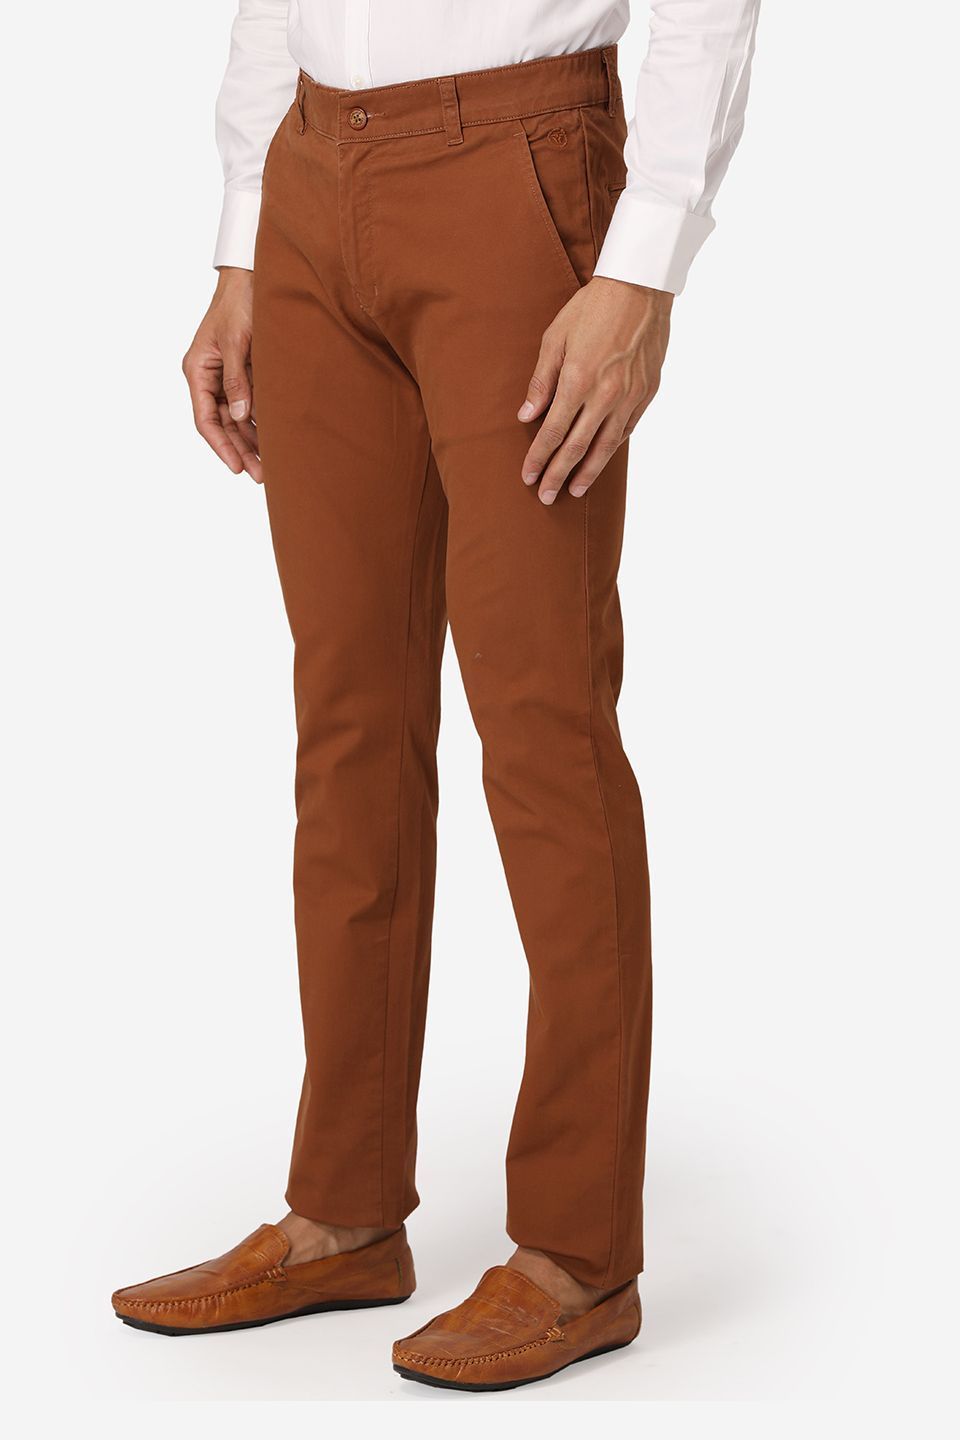 Wintage Men's Brown Regular Fit Chinos 100% Cotton Twill Stretch Trousers